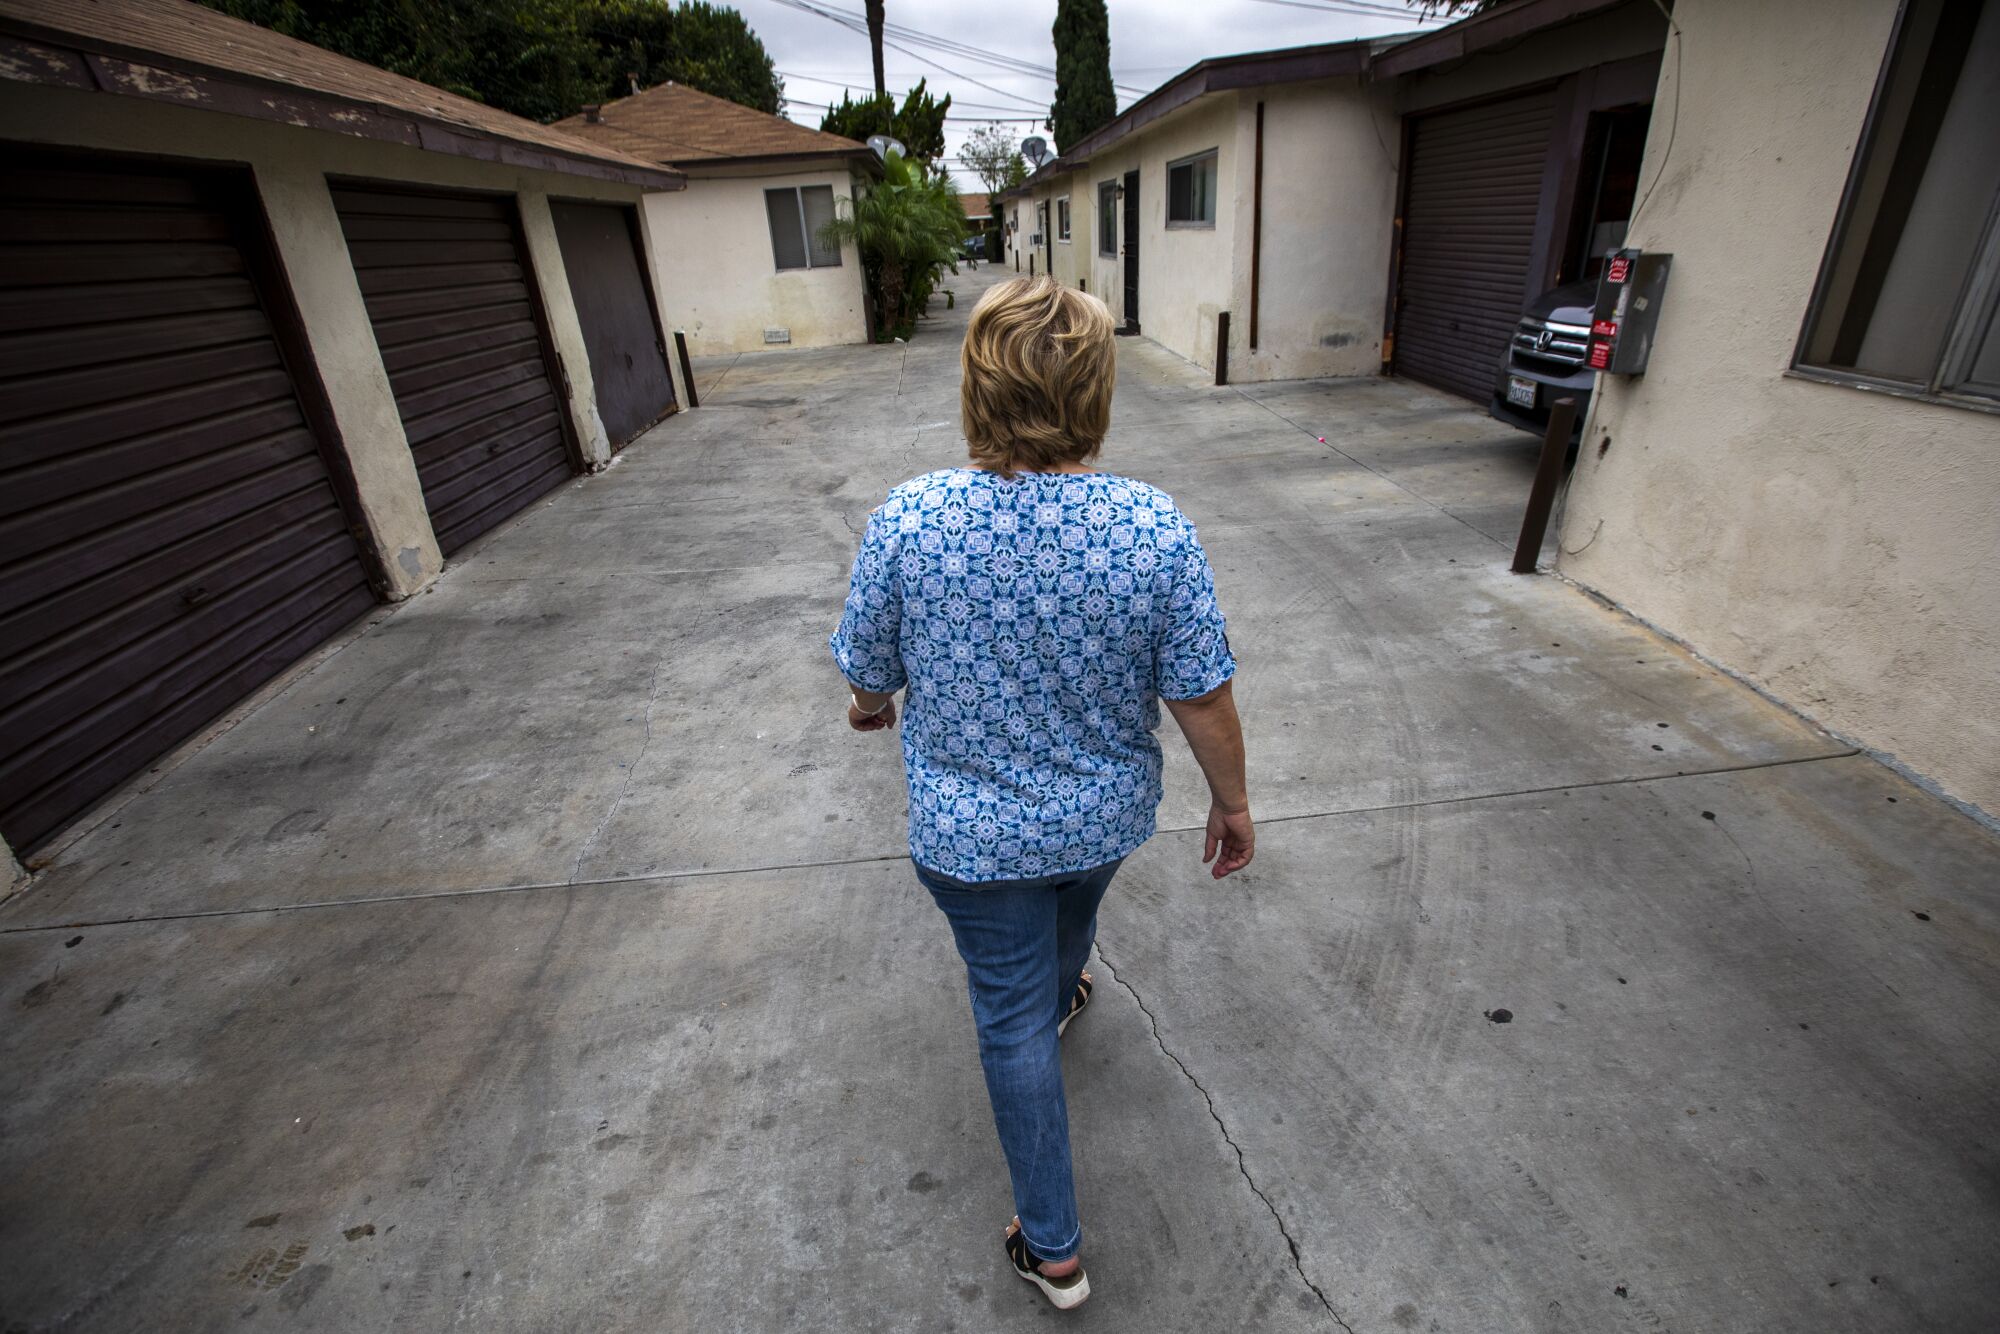 Cheryl Sanchez Simmons walks through the bungalow court in Lynwood where Jan Marsh lived with her family.